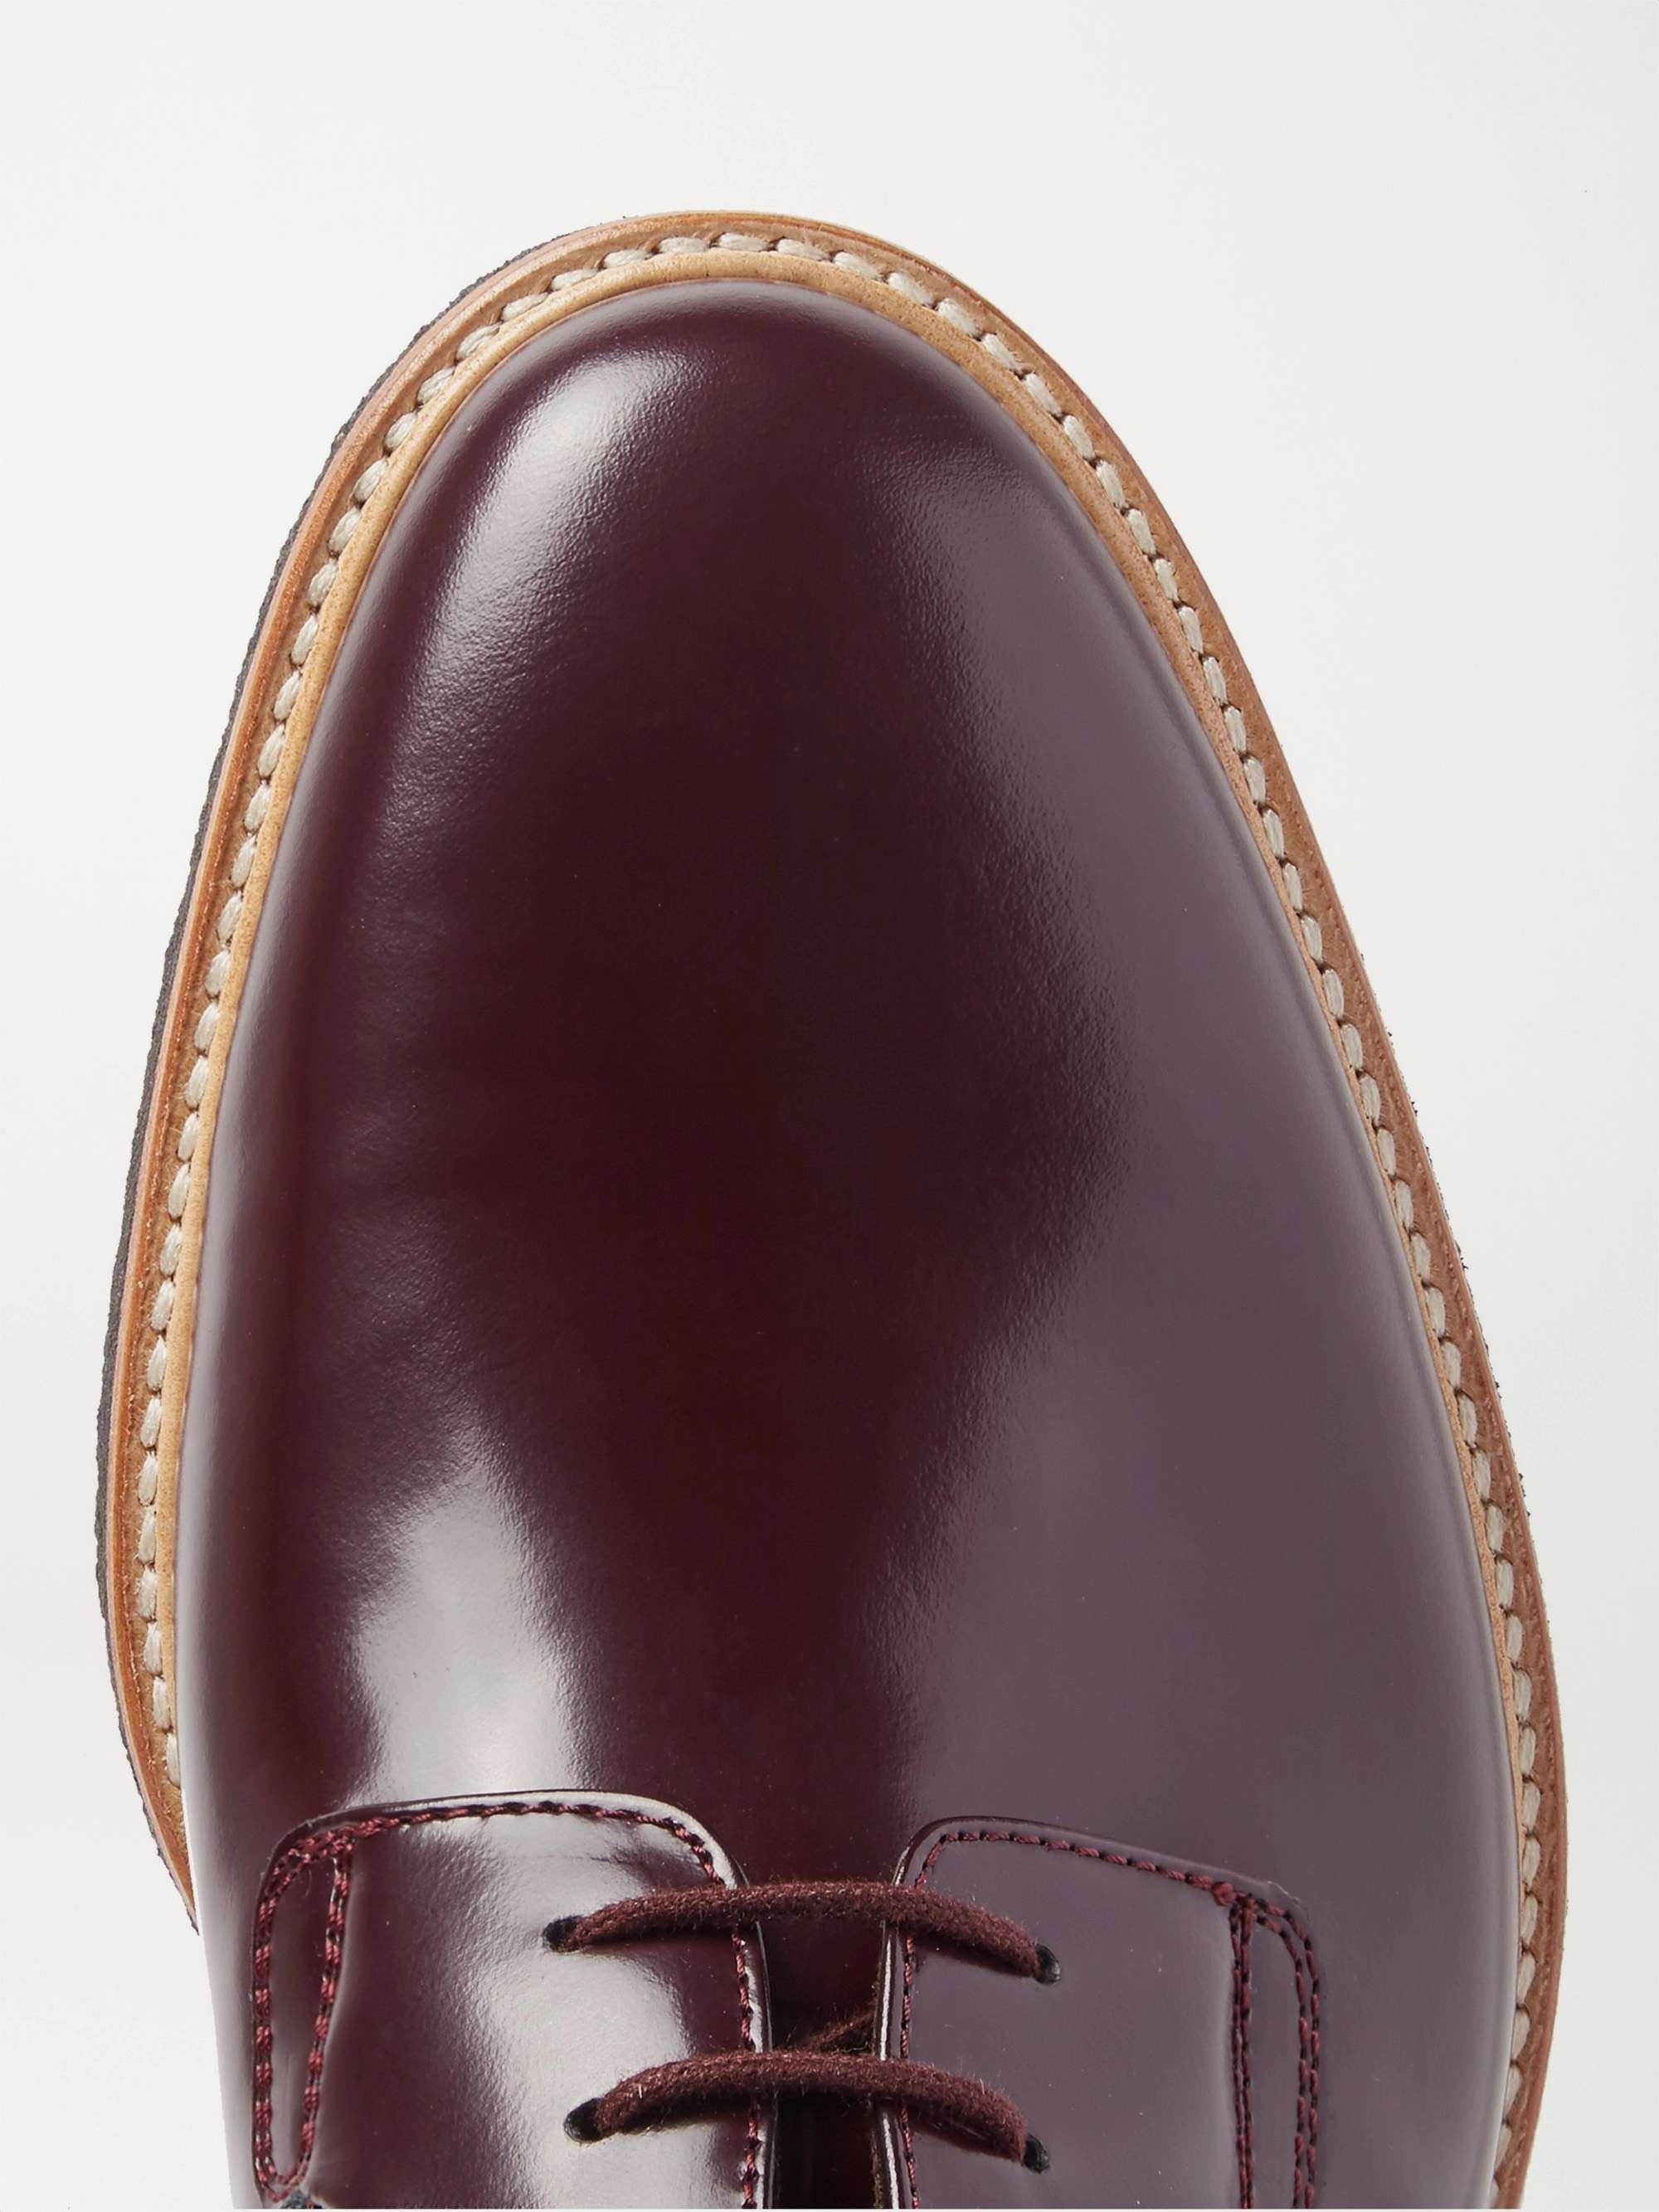 COMMON PROJECTS Polished-Leather Derby Shoes